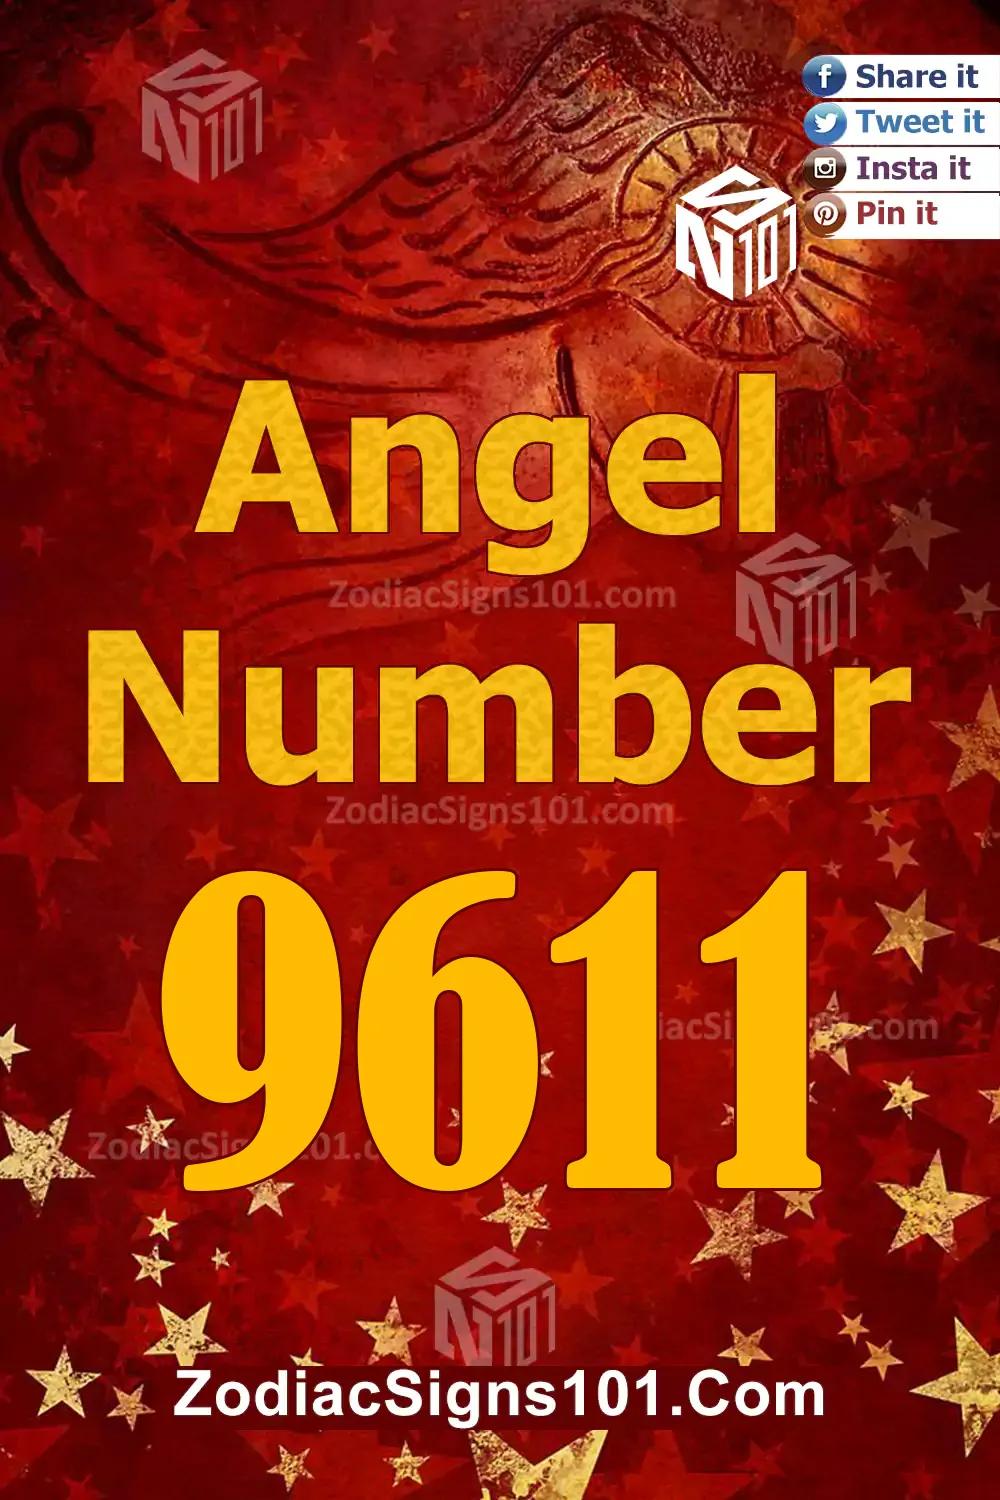 9611 Angel Number Meaning